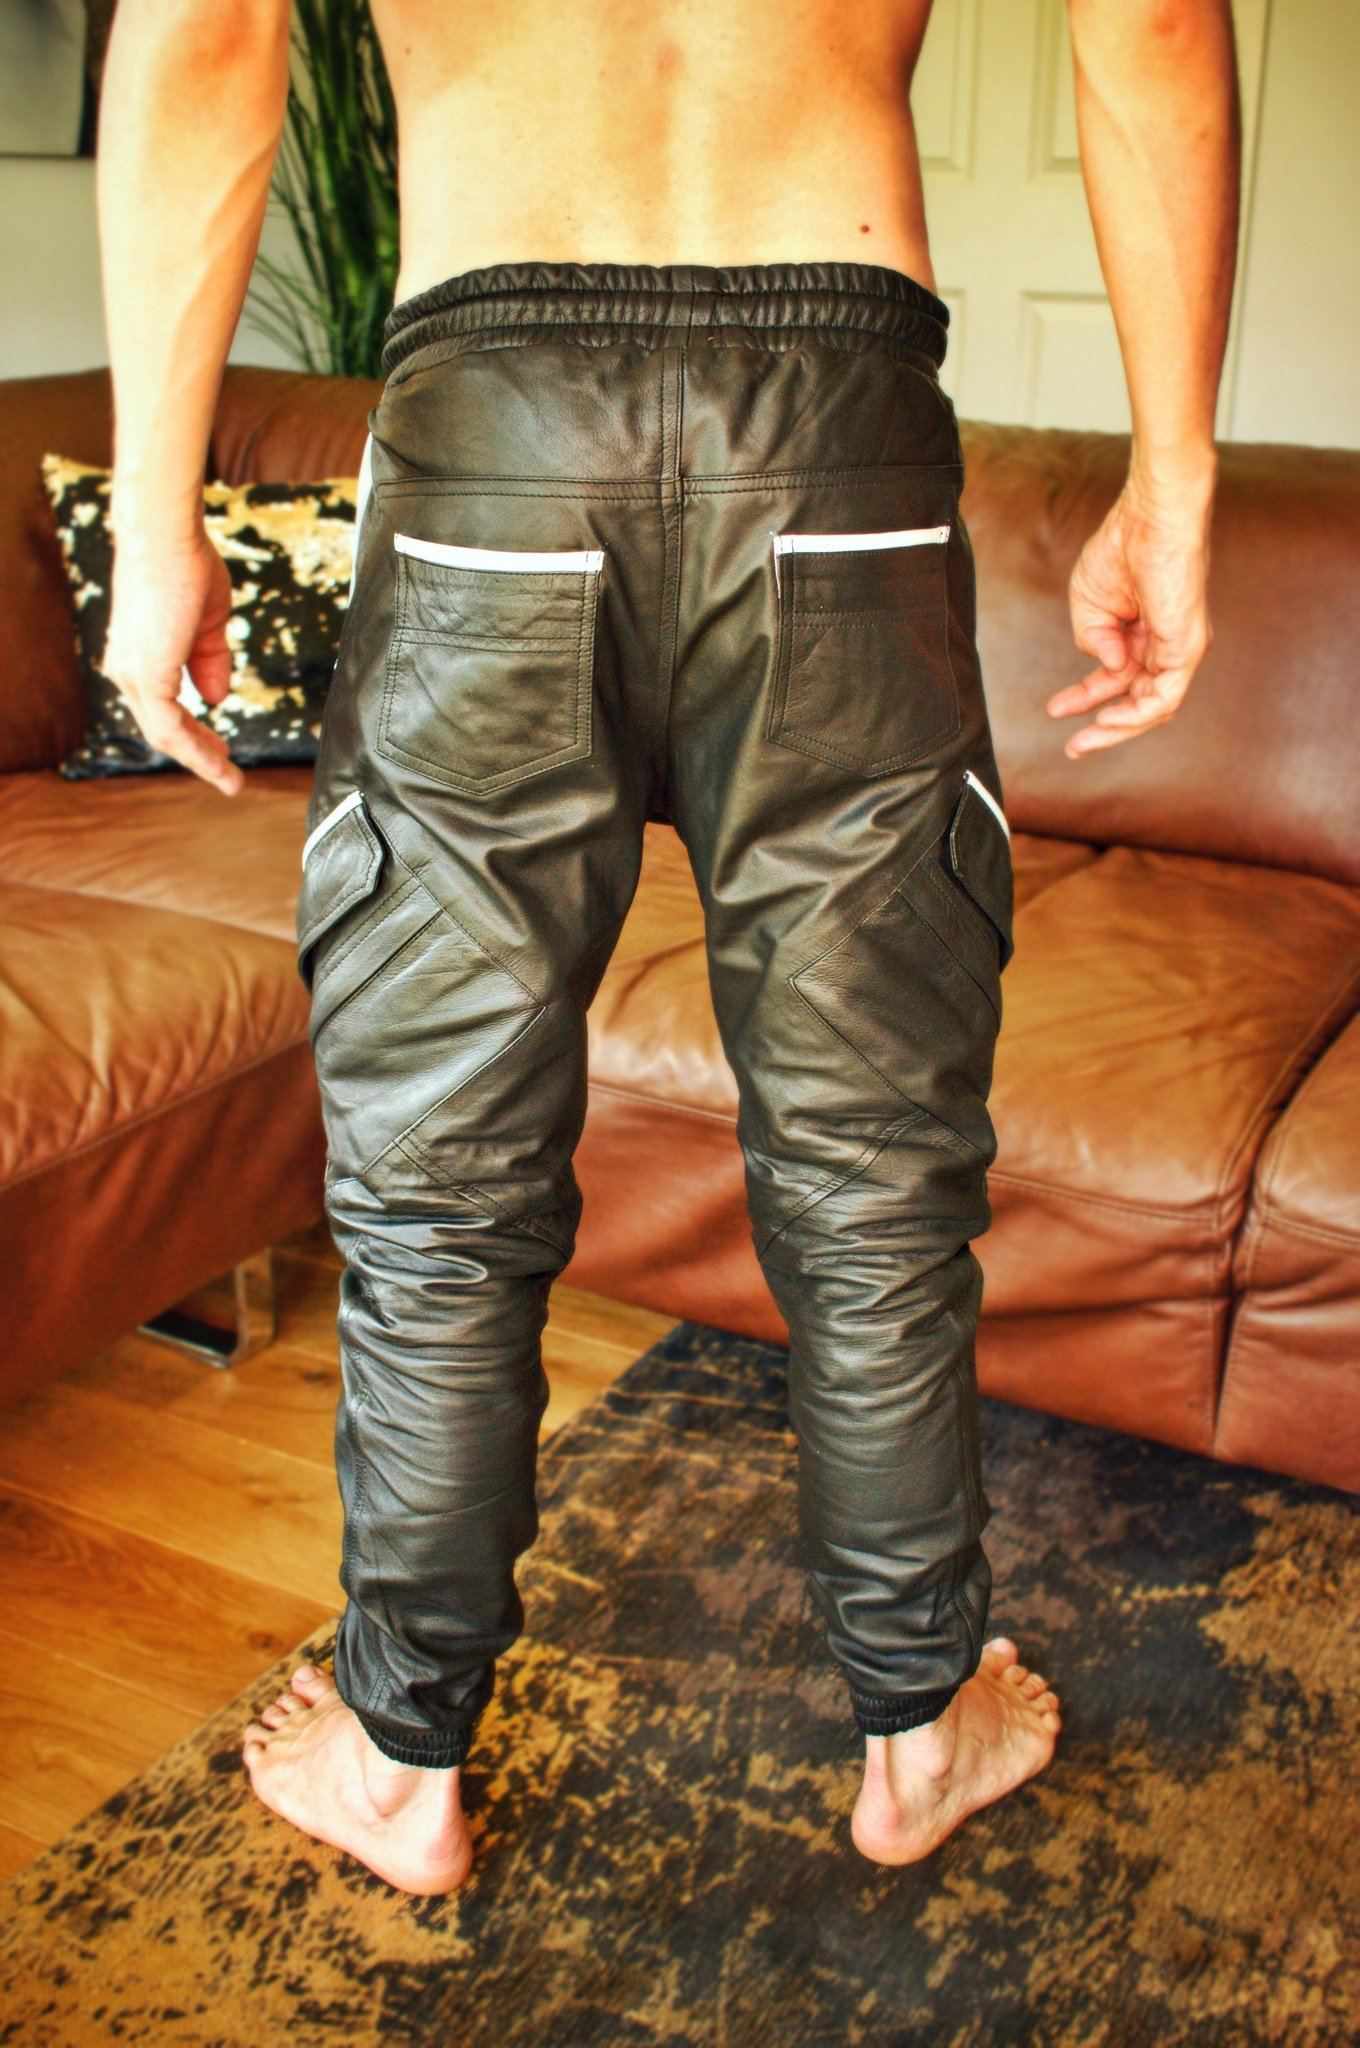 Glossy Patent Leather Latex Pants Men With Two Way Zipper And